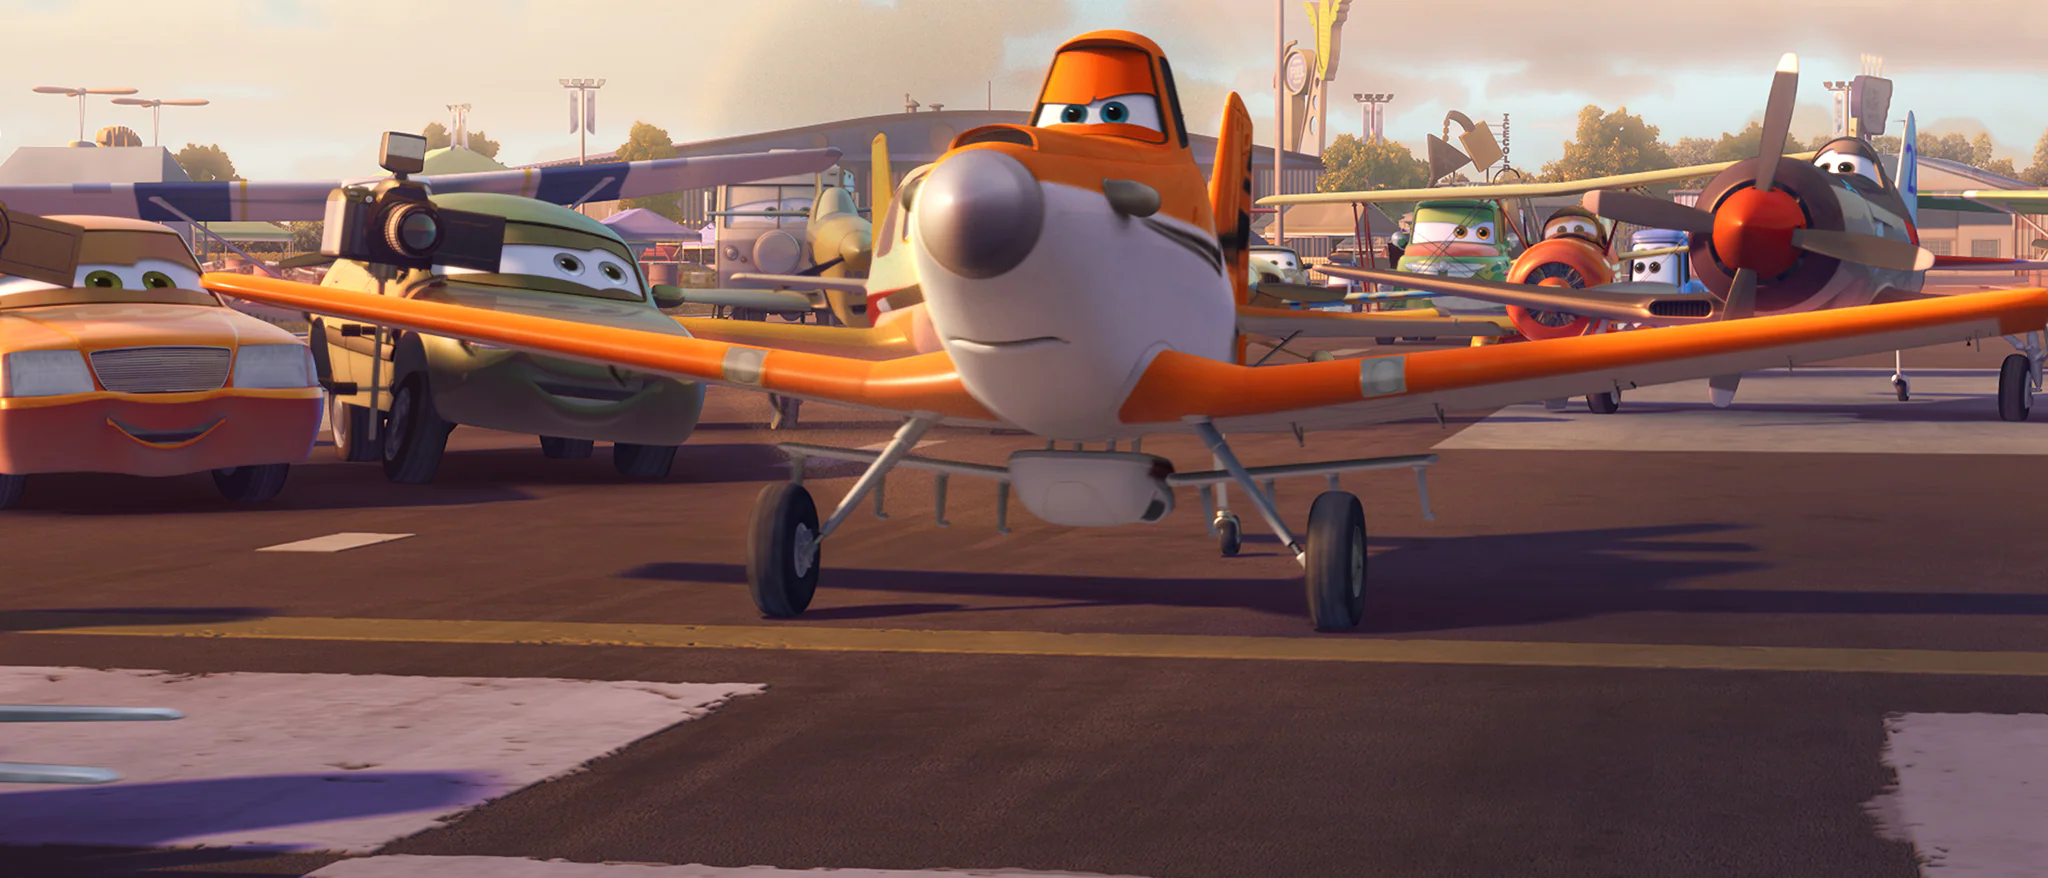 Successful Movies with Unsuccessful Spinoffs: Planes